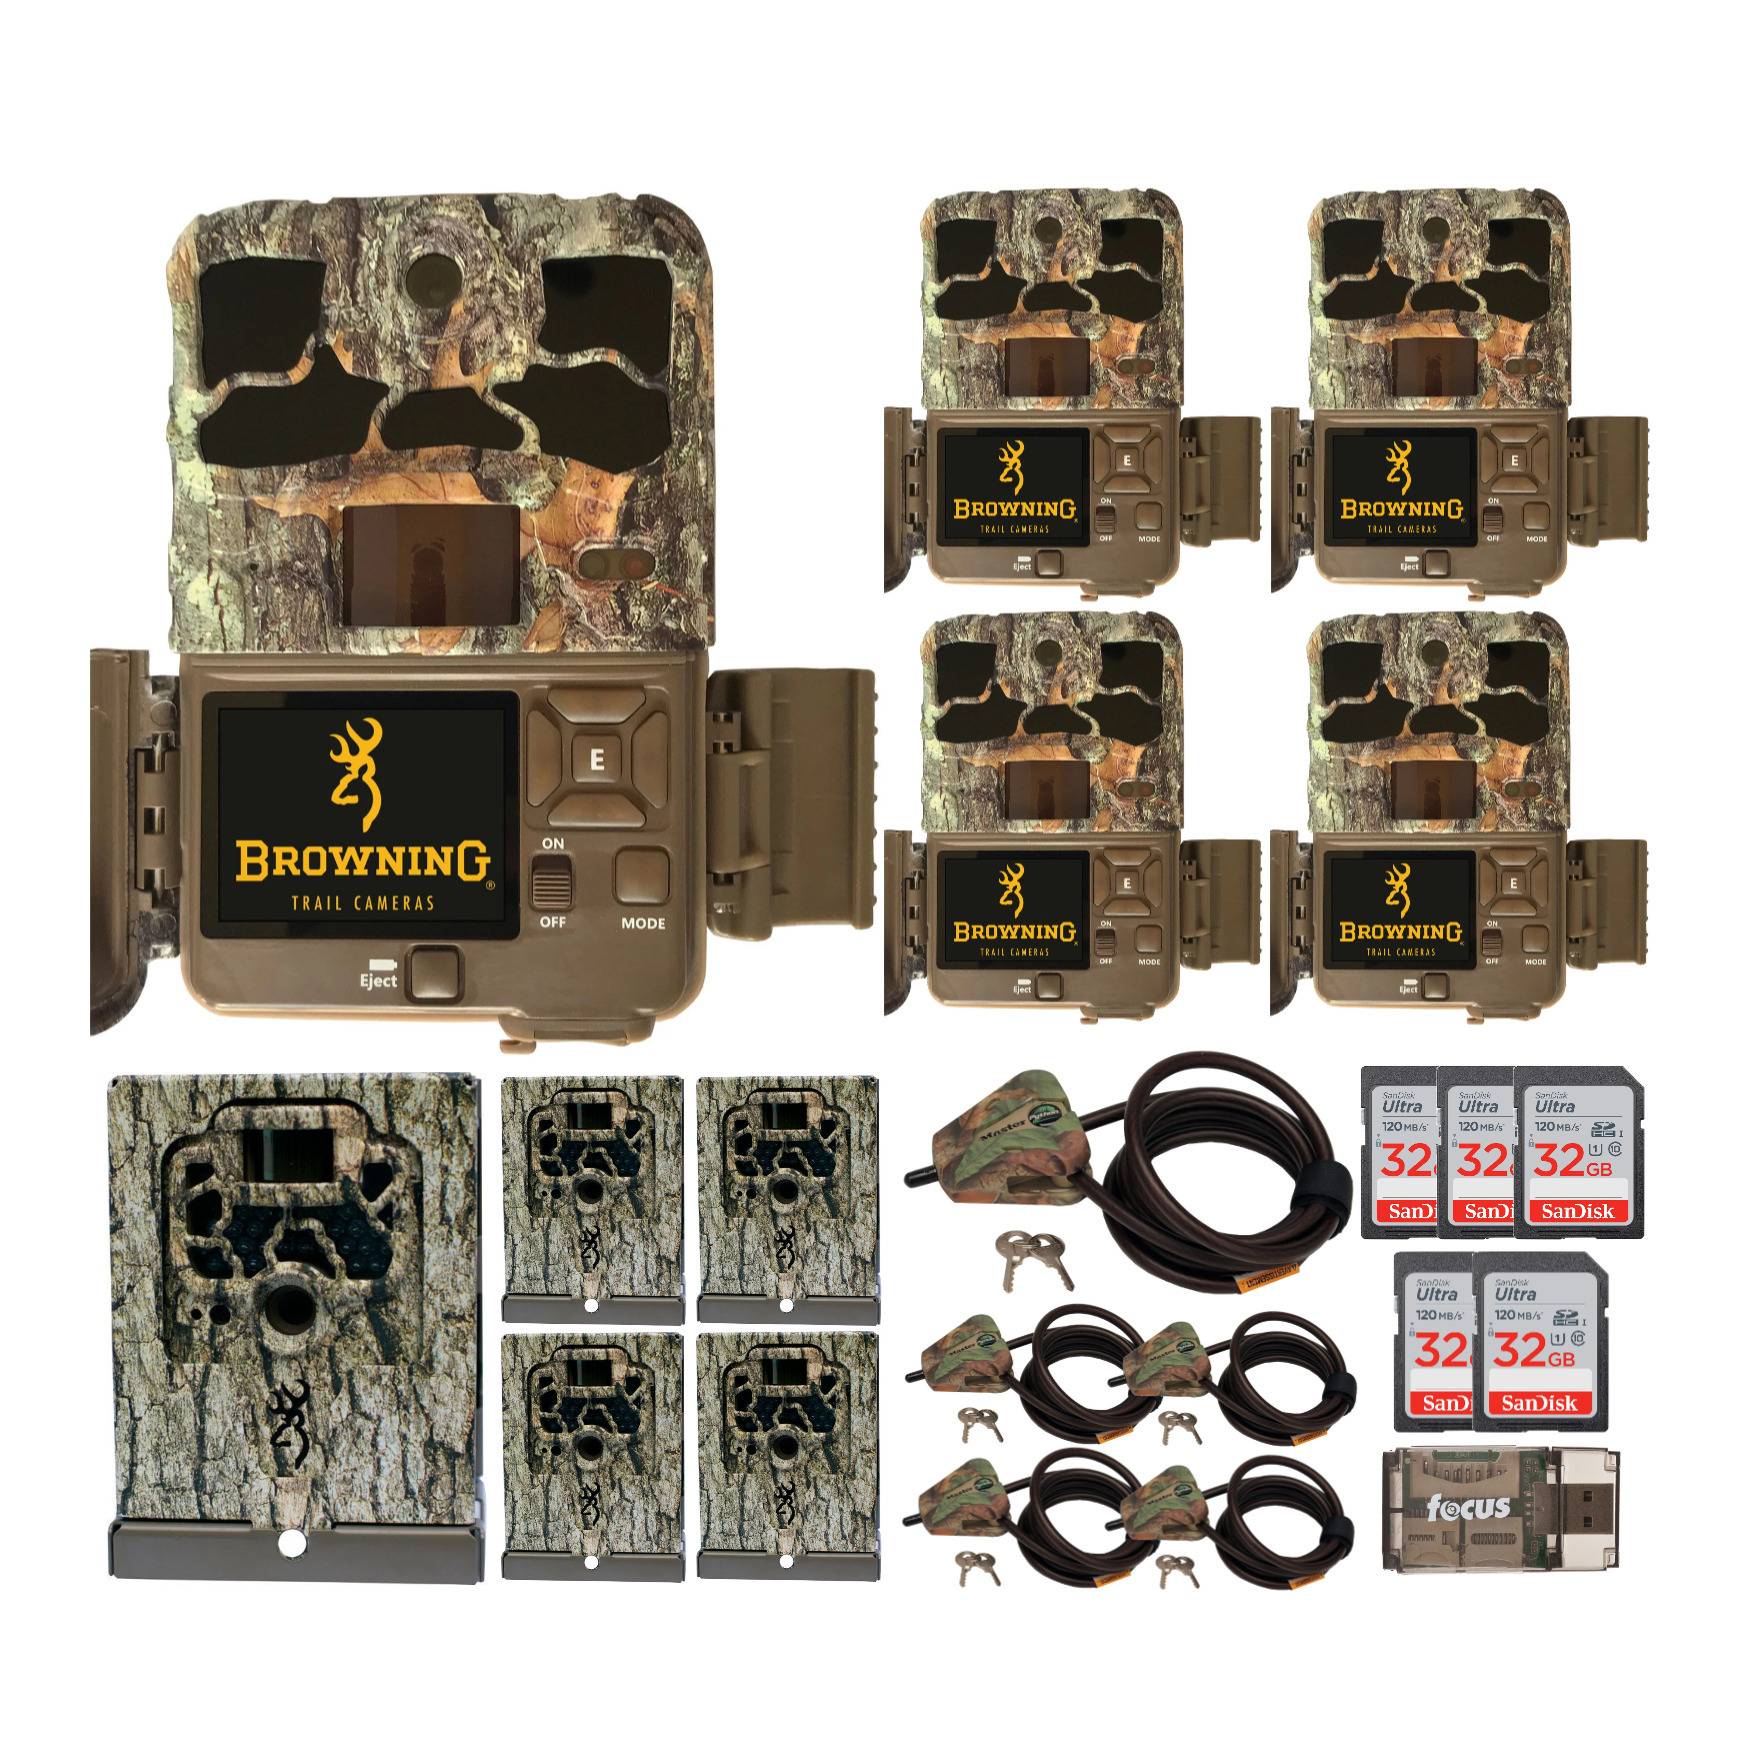 Browning Trail Cameras 20MP Spec OPS Edge Trail Camera Security Bundle (5-Pack)